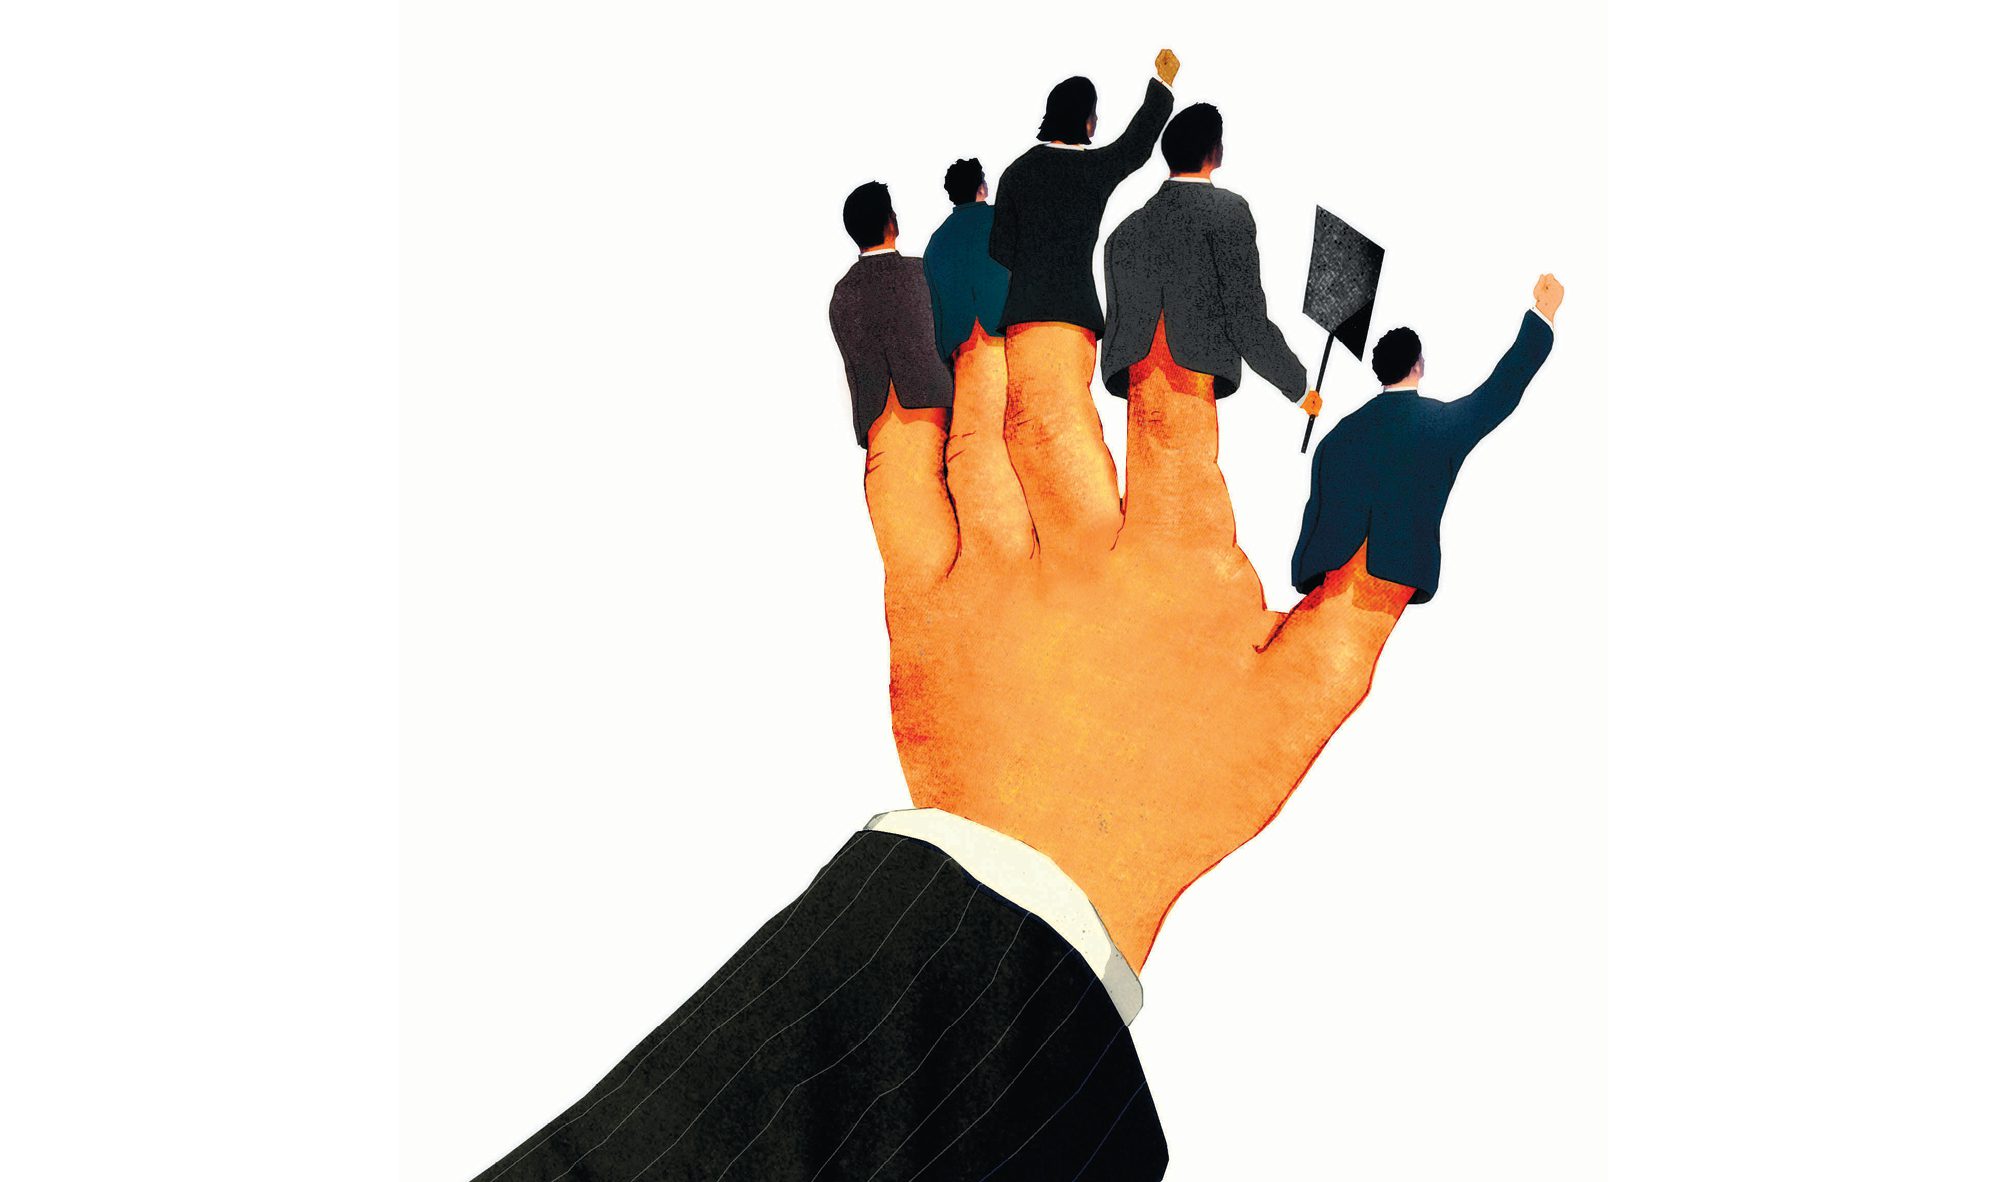 Illustration of a hand of a person wearing a business suit with finger puppets on all five fingers. The puppets are calling for some sort of action, denoting corporate influence.